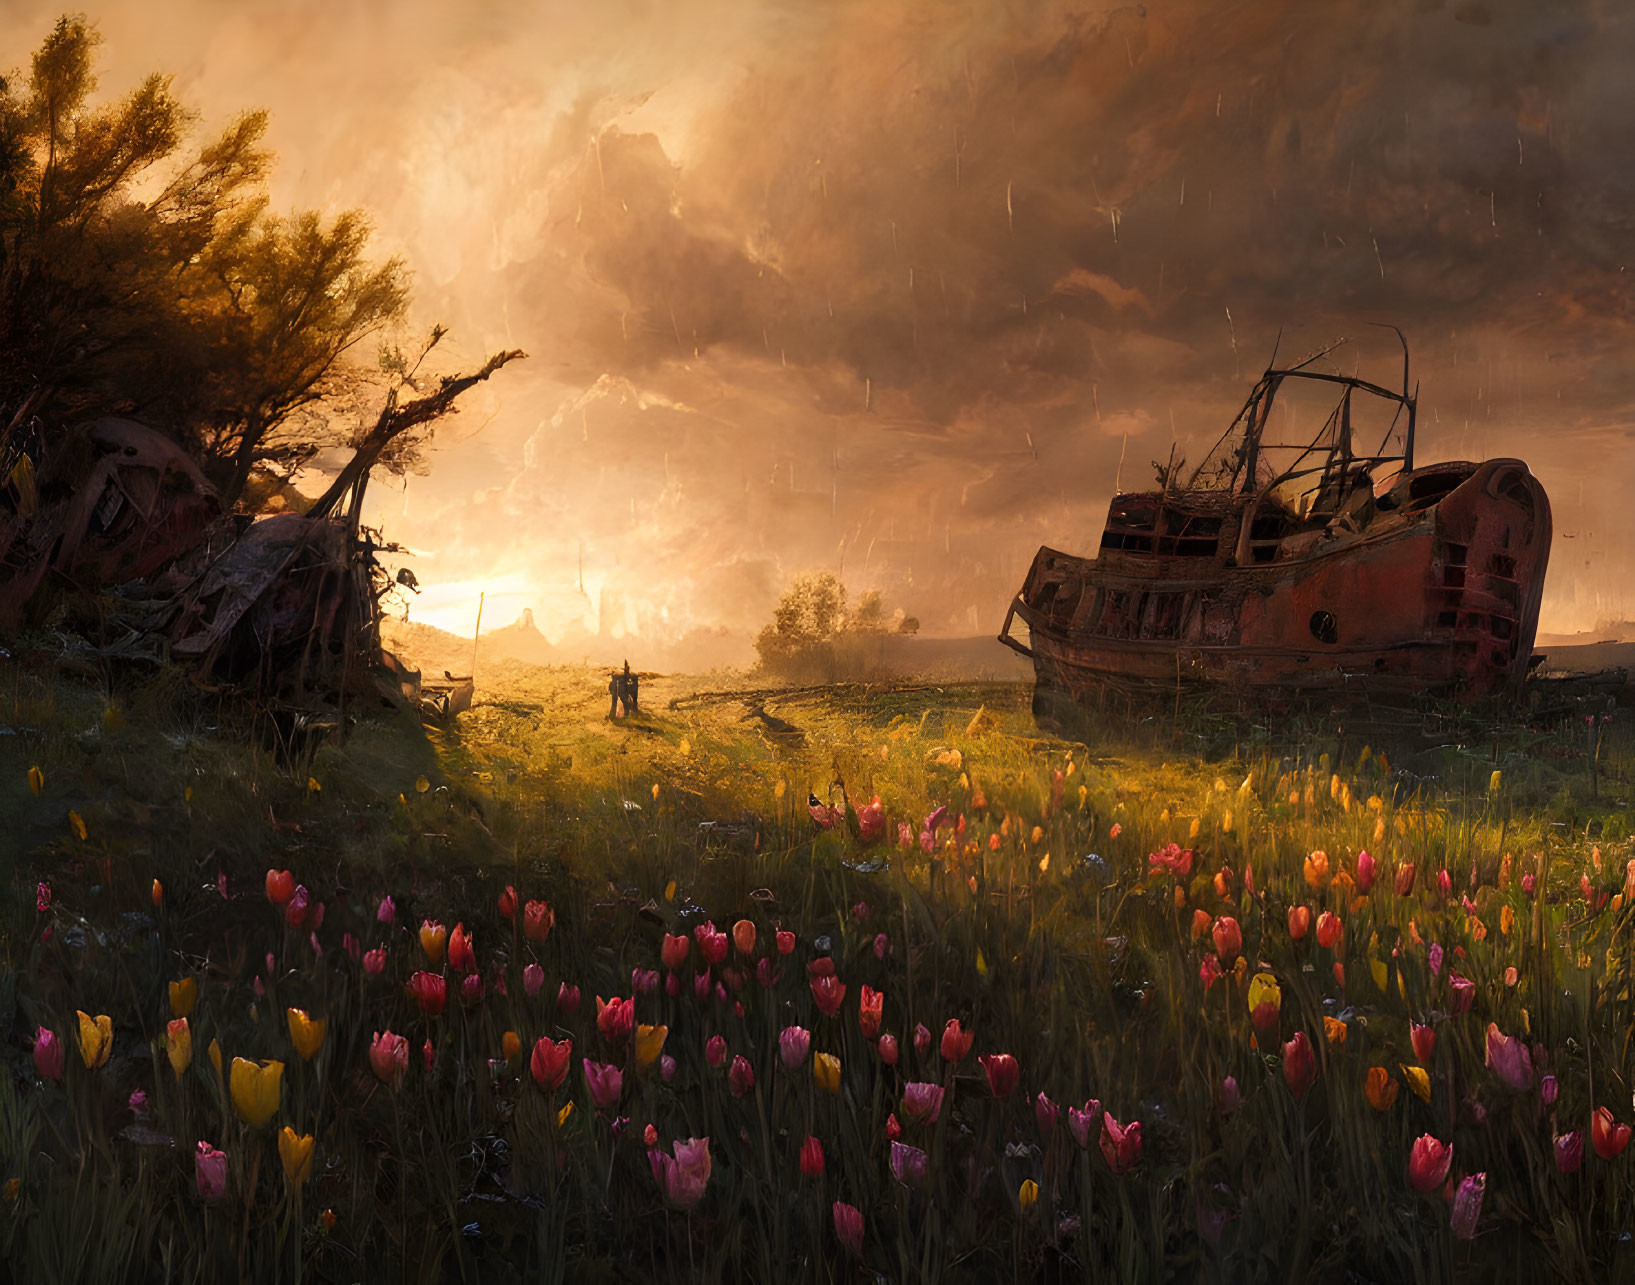 Multicolored tulips field with person near rusting shipwreck under stormy sunset sky